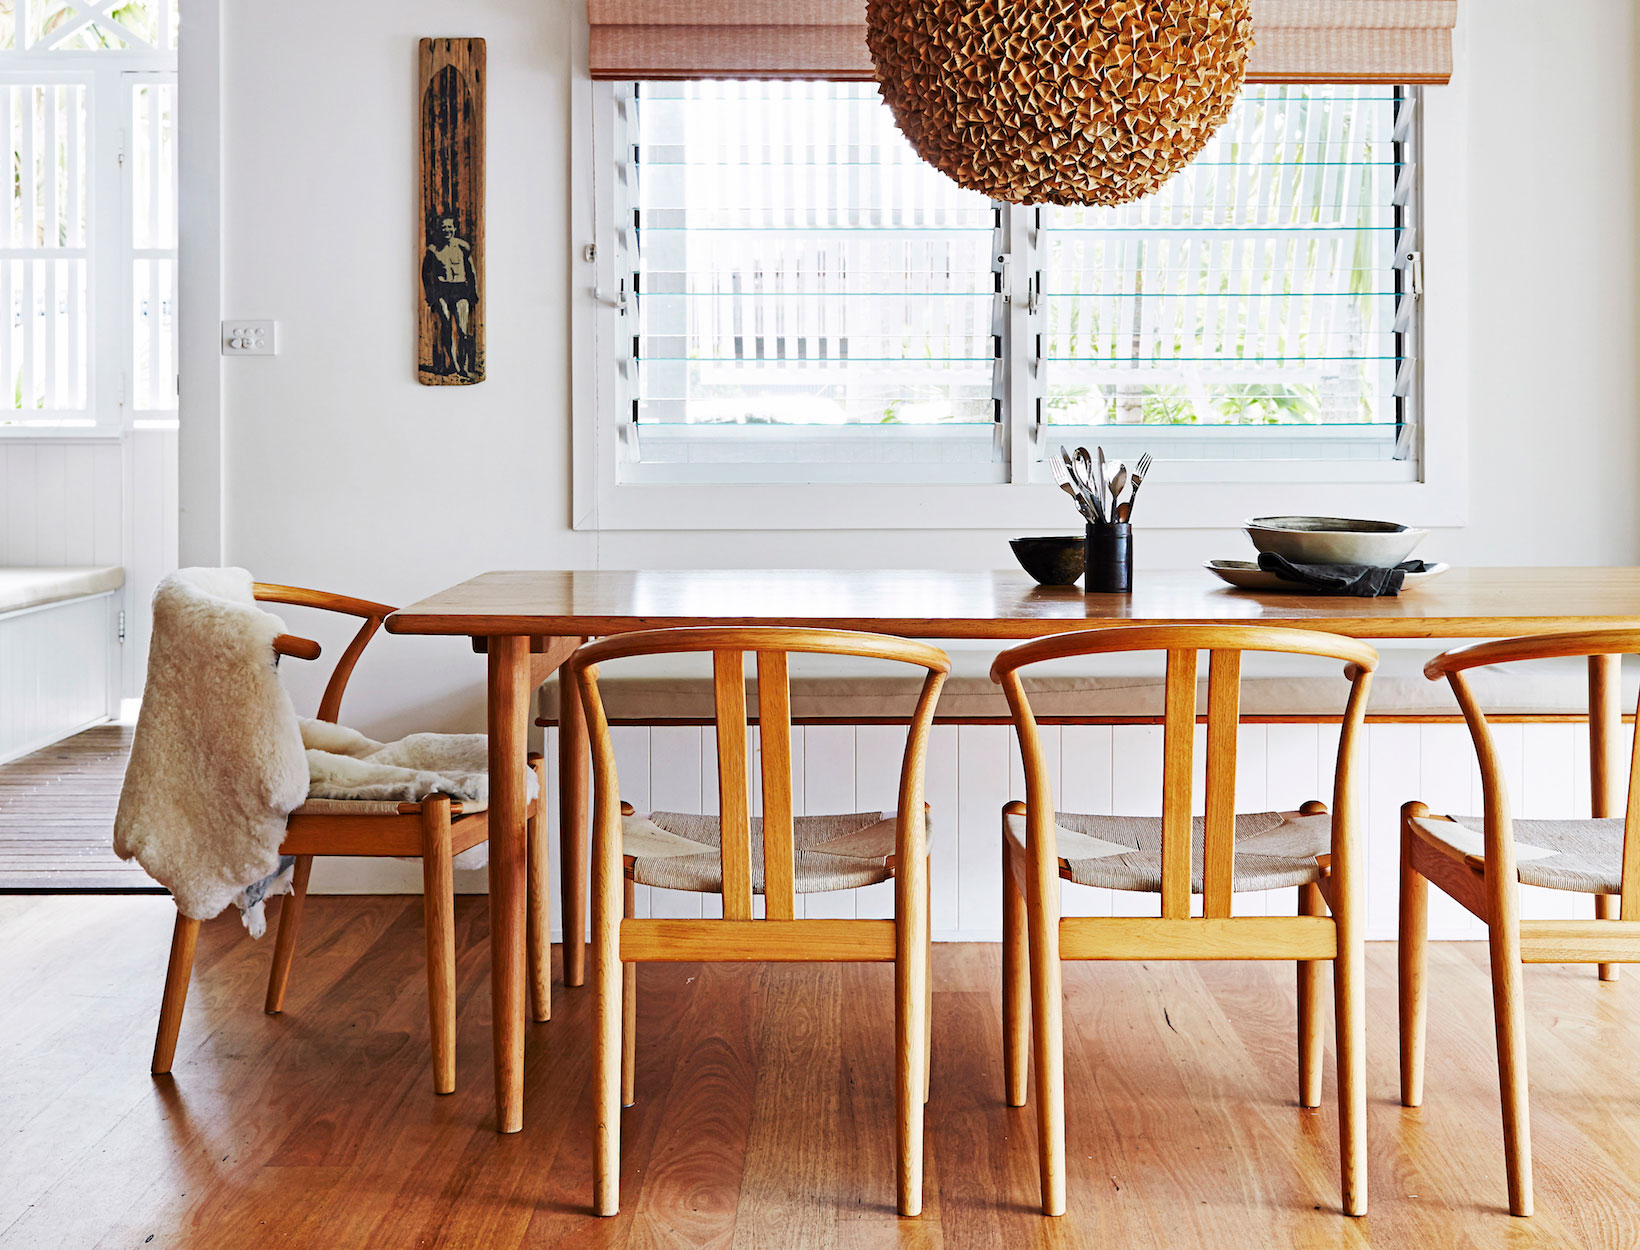 Favorite Dining Tables, Best Dining Room Table Brands